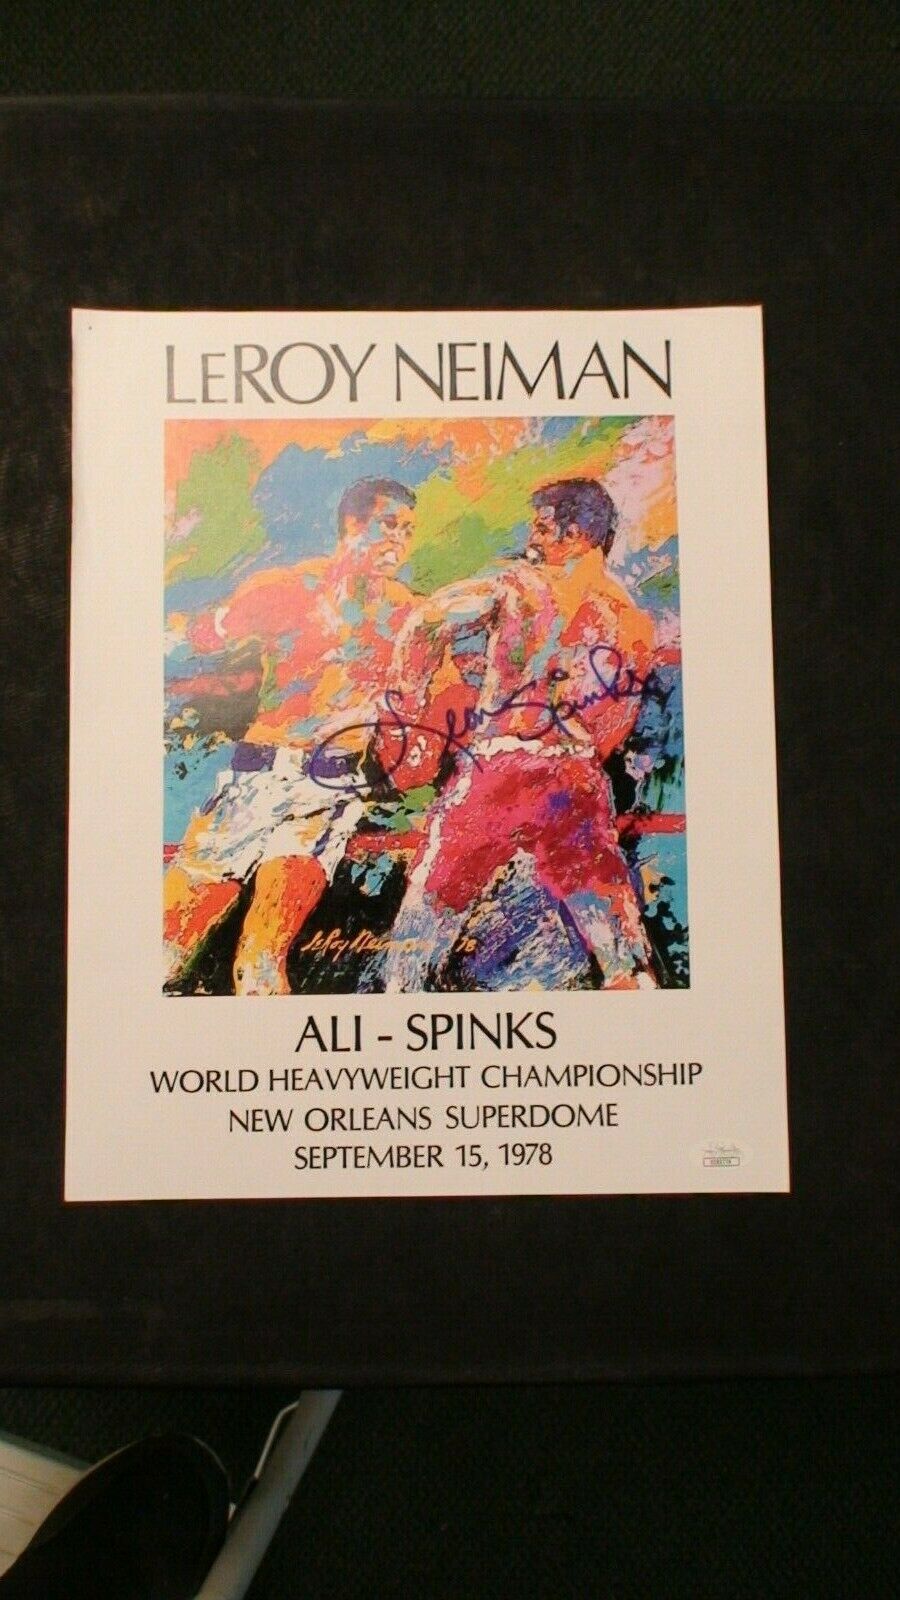 Very Rare Leroy Neiman Poster Autographed By Leon Spinks With Jsa Coa Included!